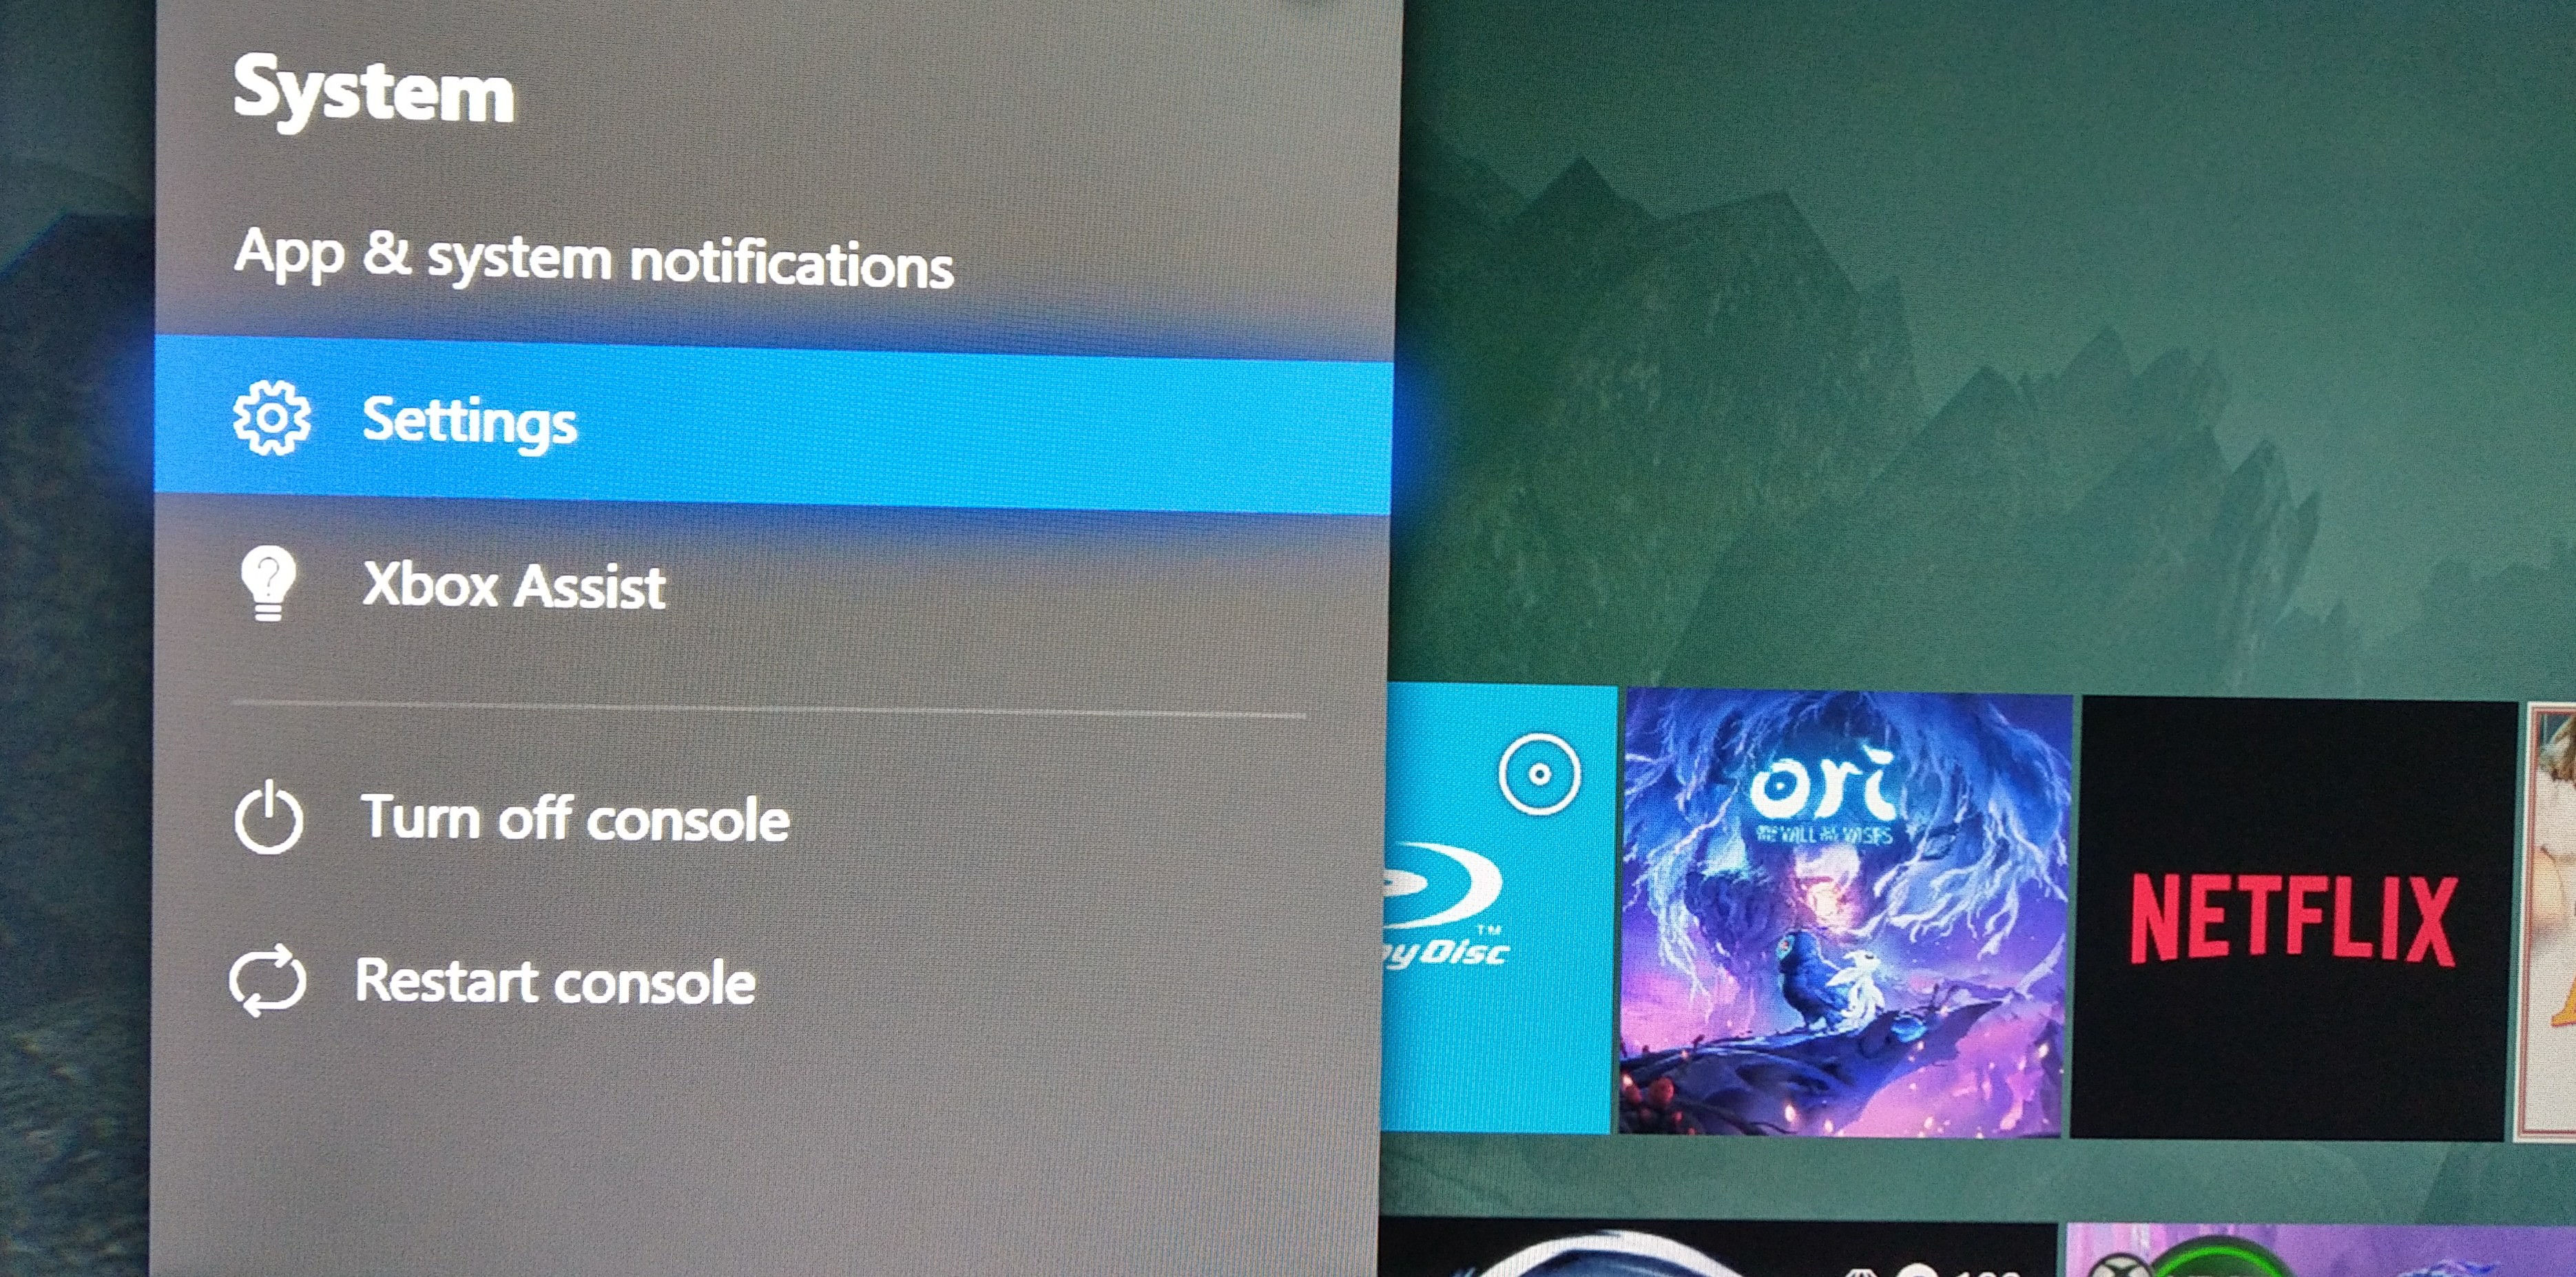 How to Disable HDR on Xbox Series X: Quick Guide